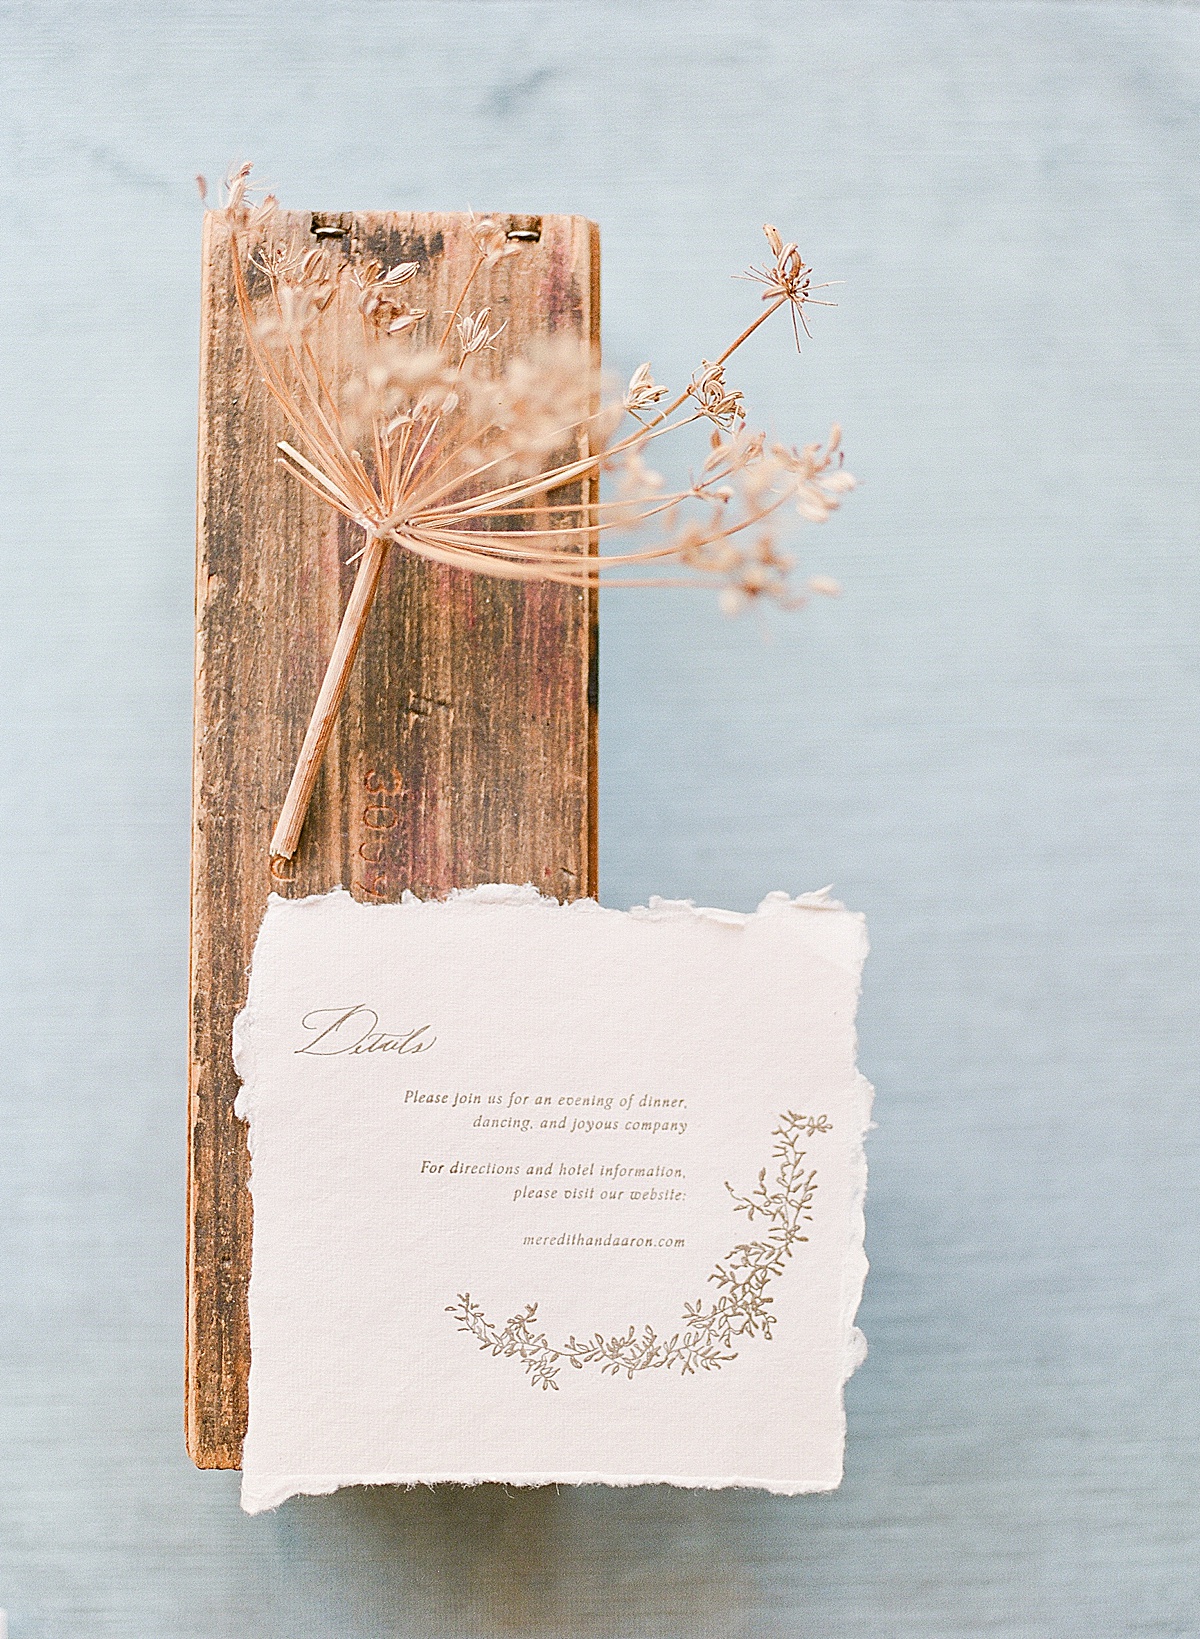 Fine Art Wedding Invitation Details Card on Wood Block with Dried Flowers Photo